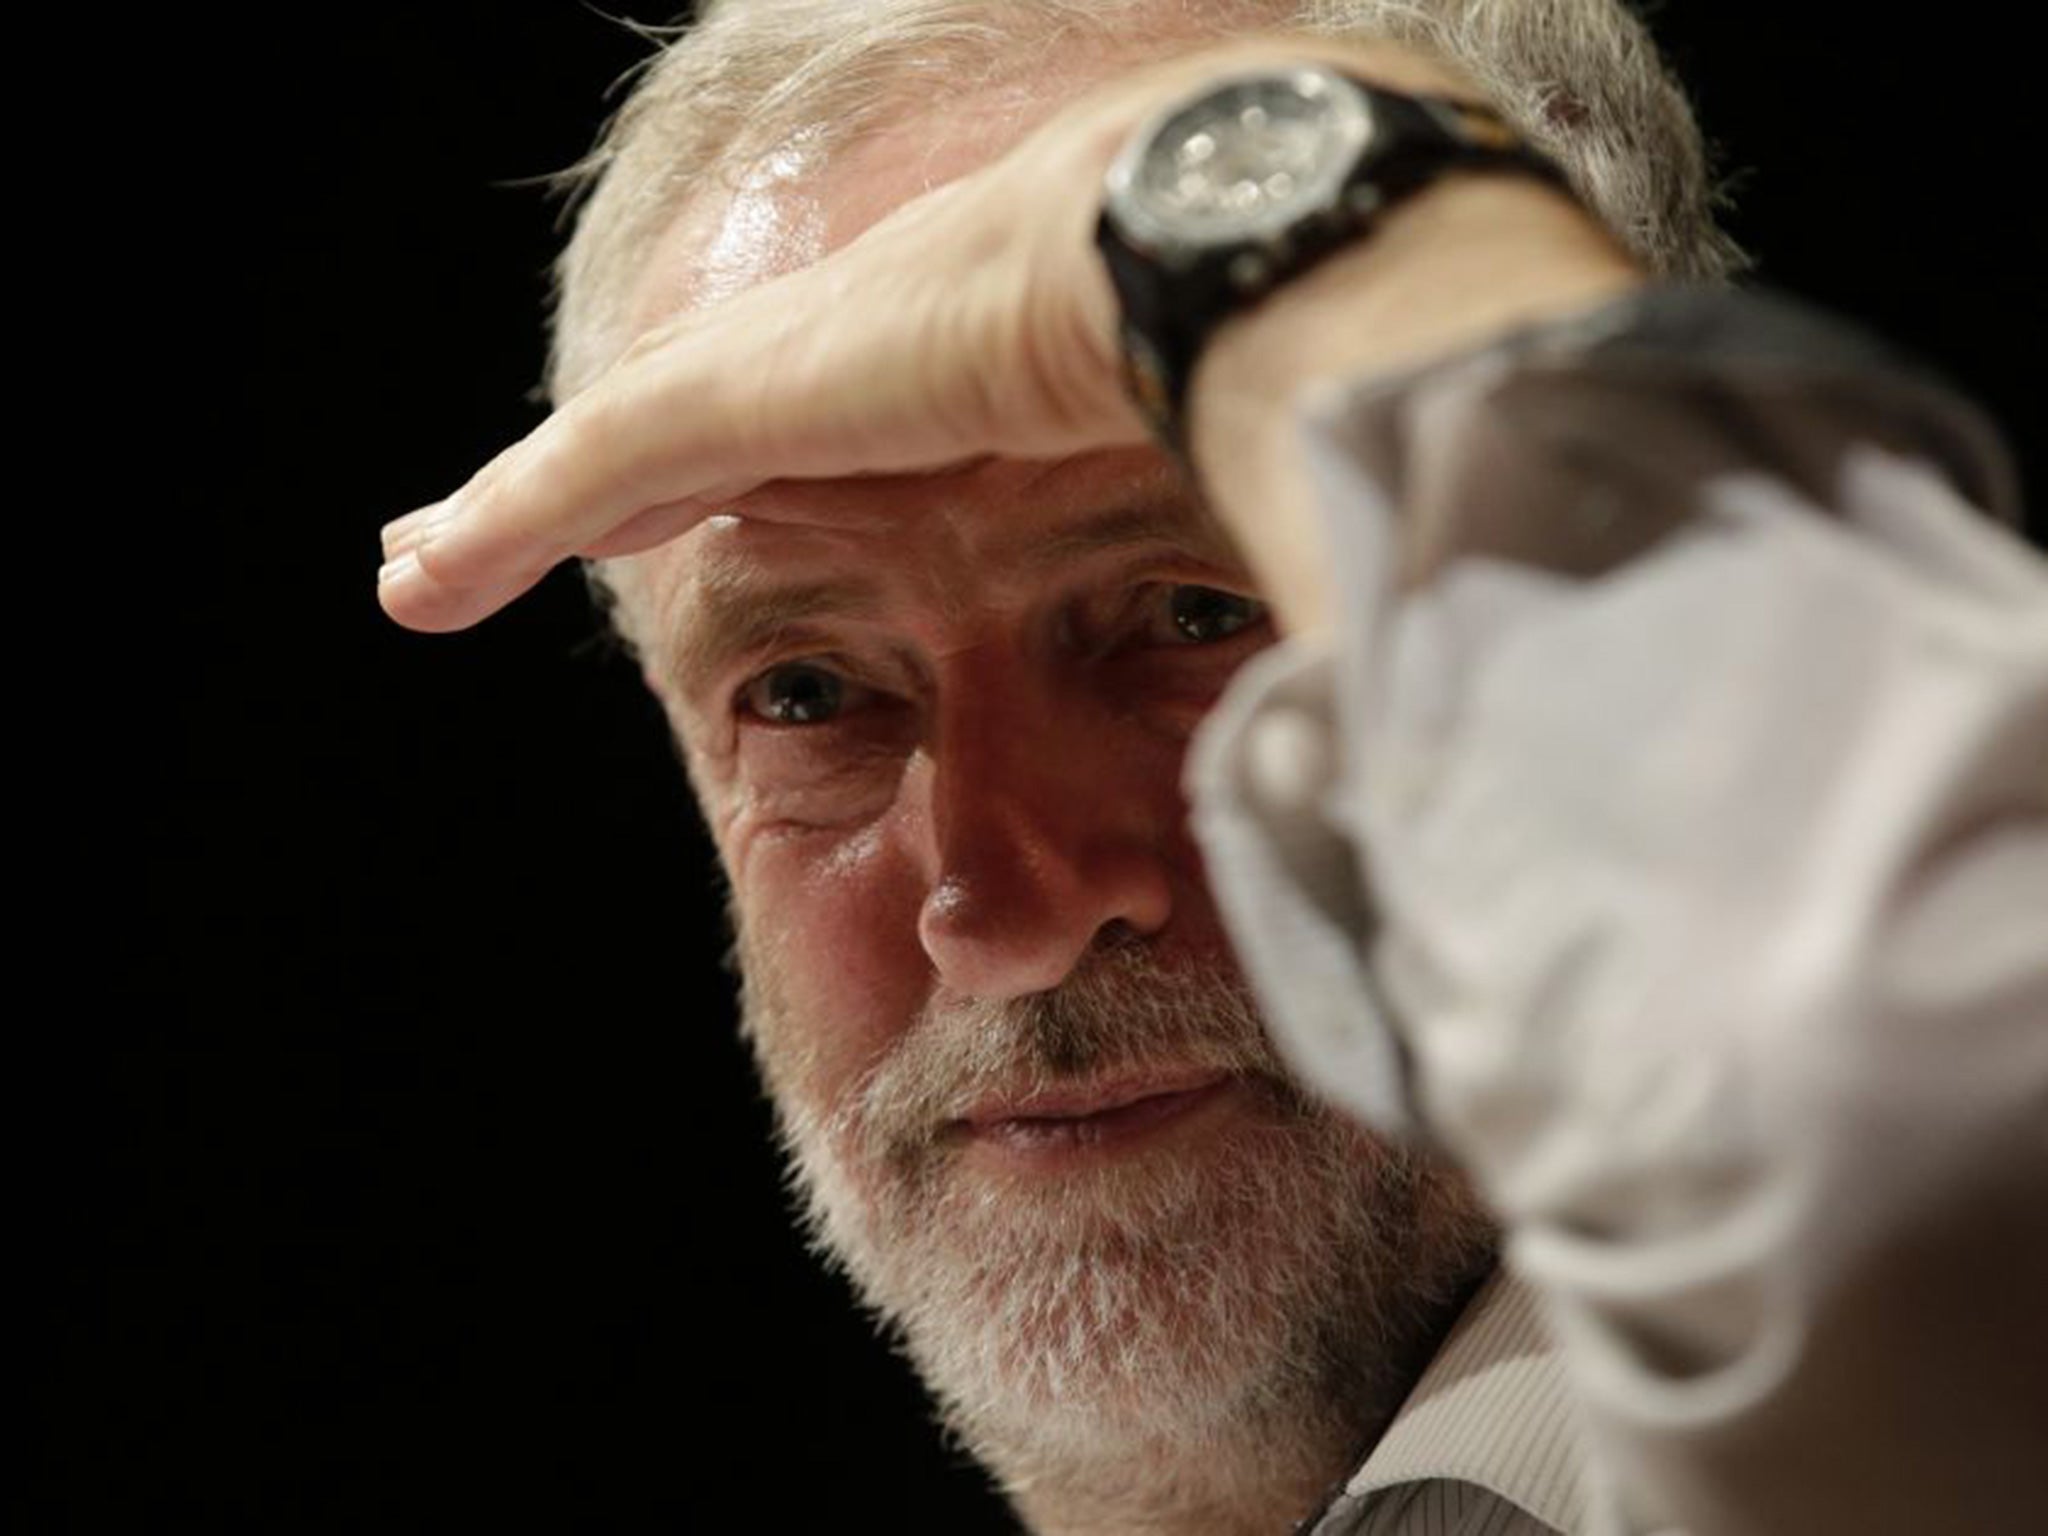 Jeremy Corbyn will be 70 at the 2020 election